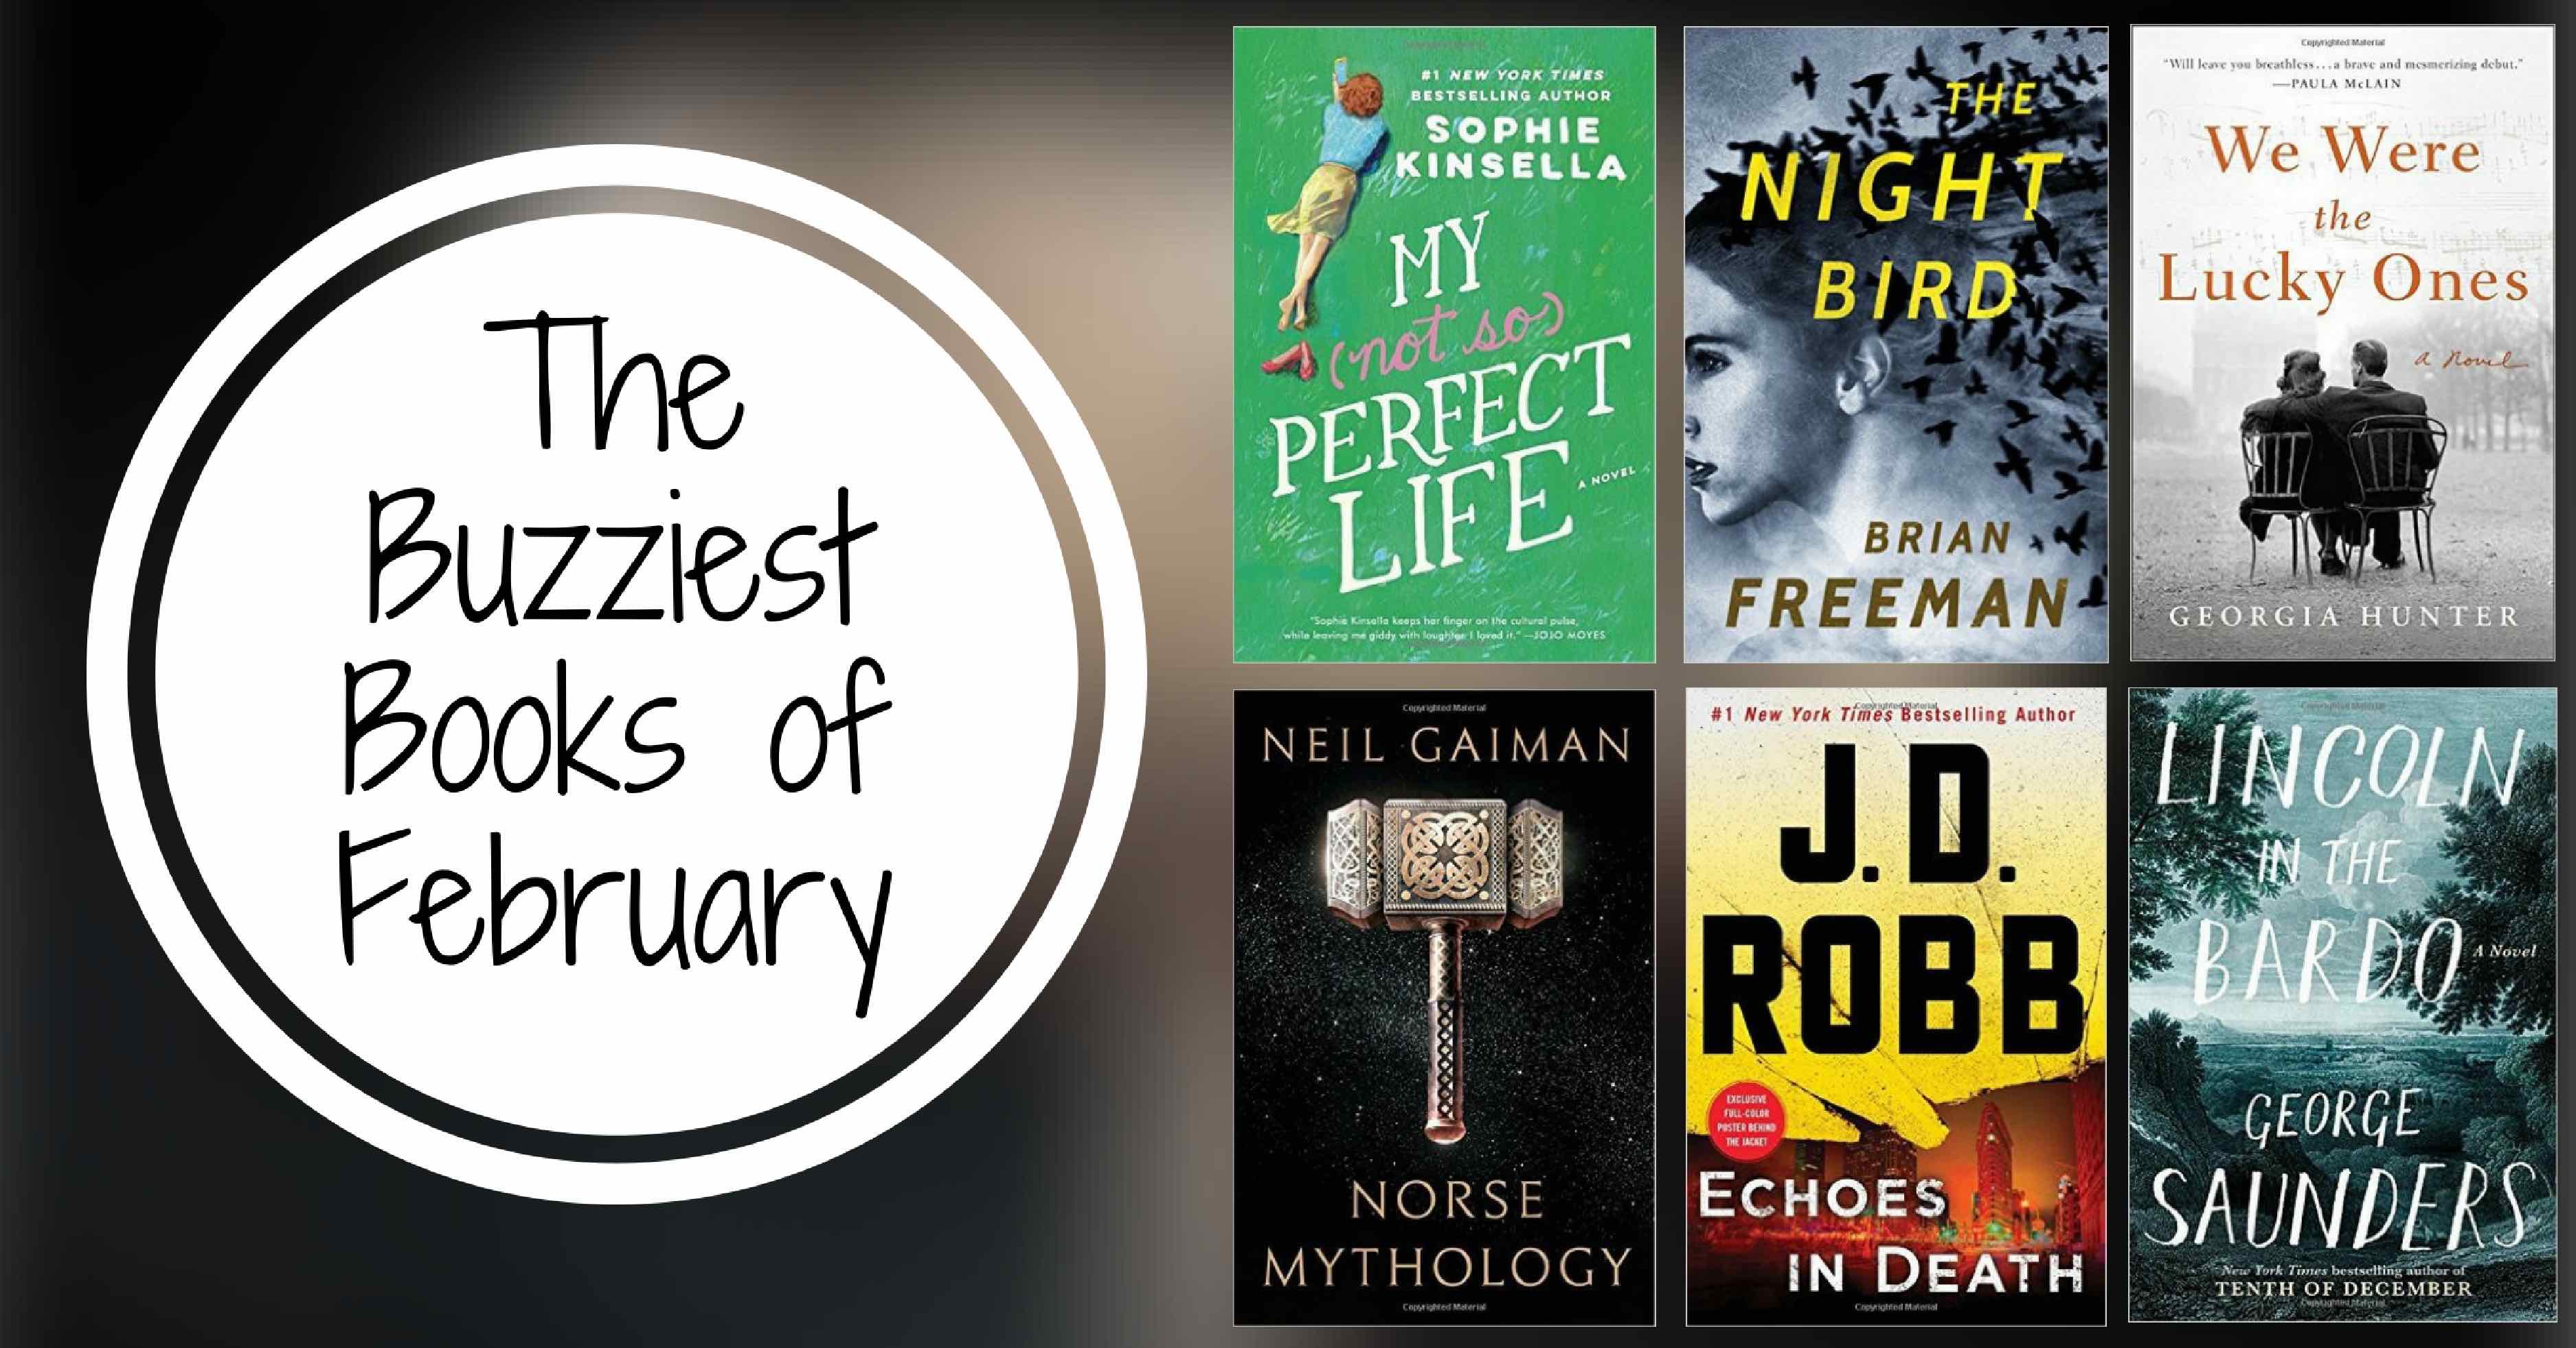 The Buzziest Books of February